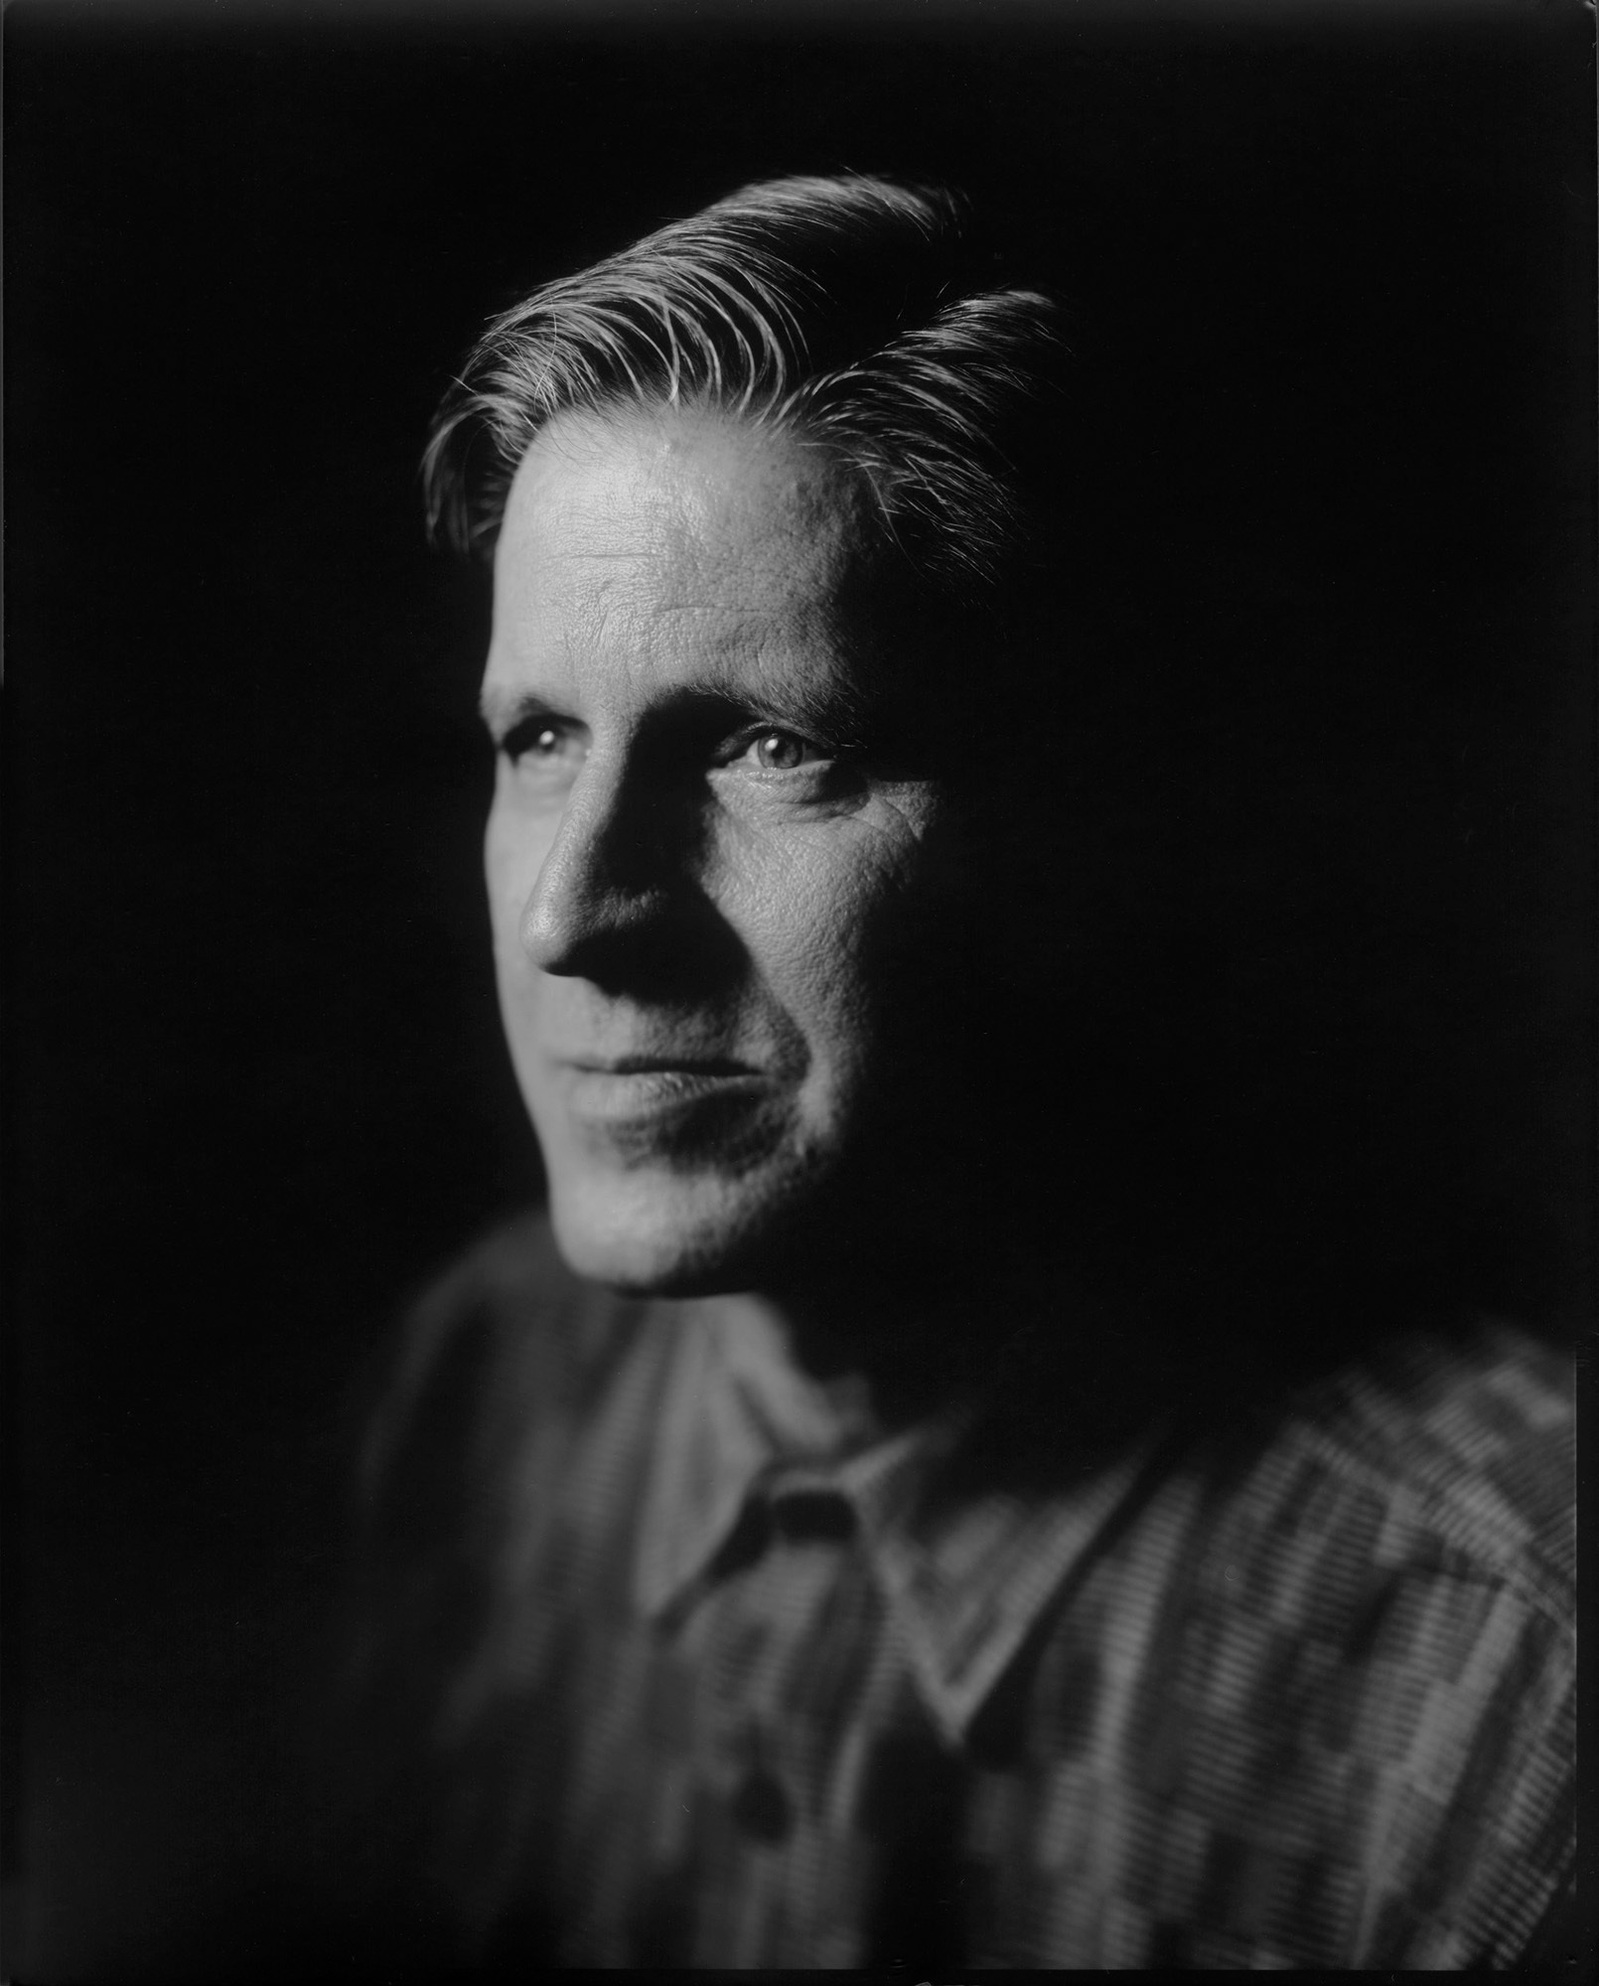 Large format paper negative portrait of a man in studio setting.